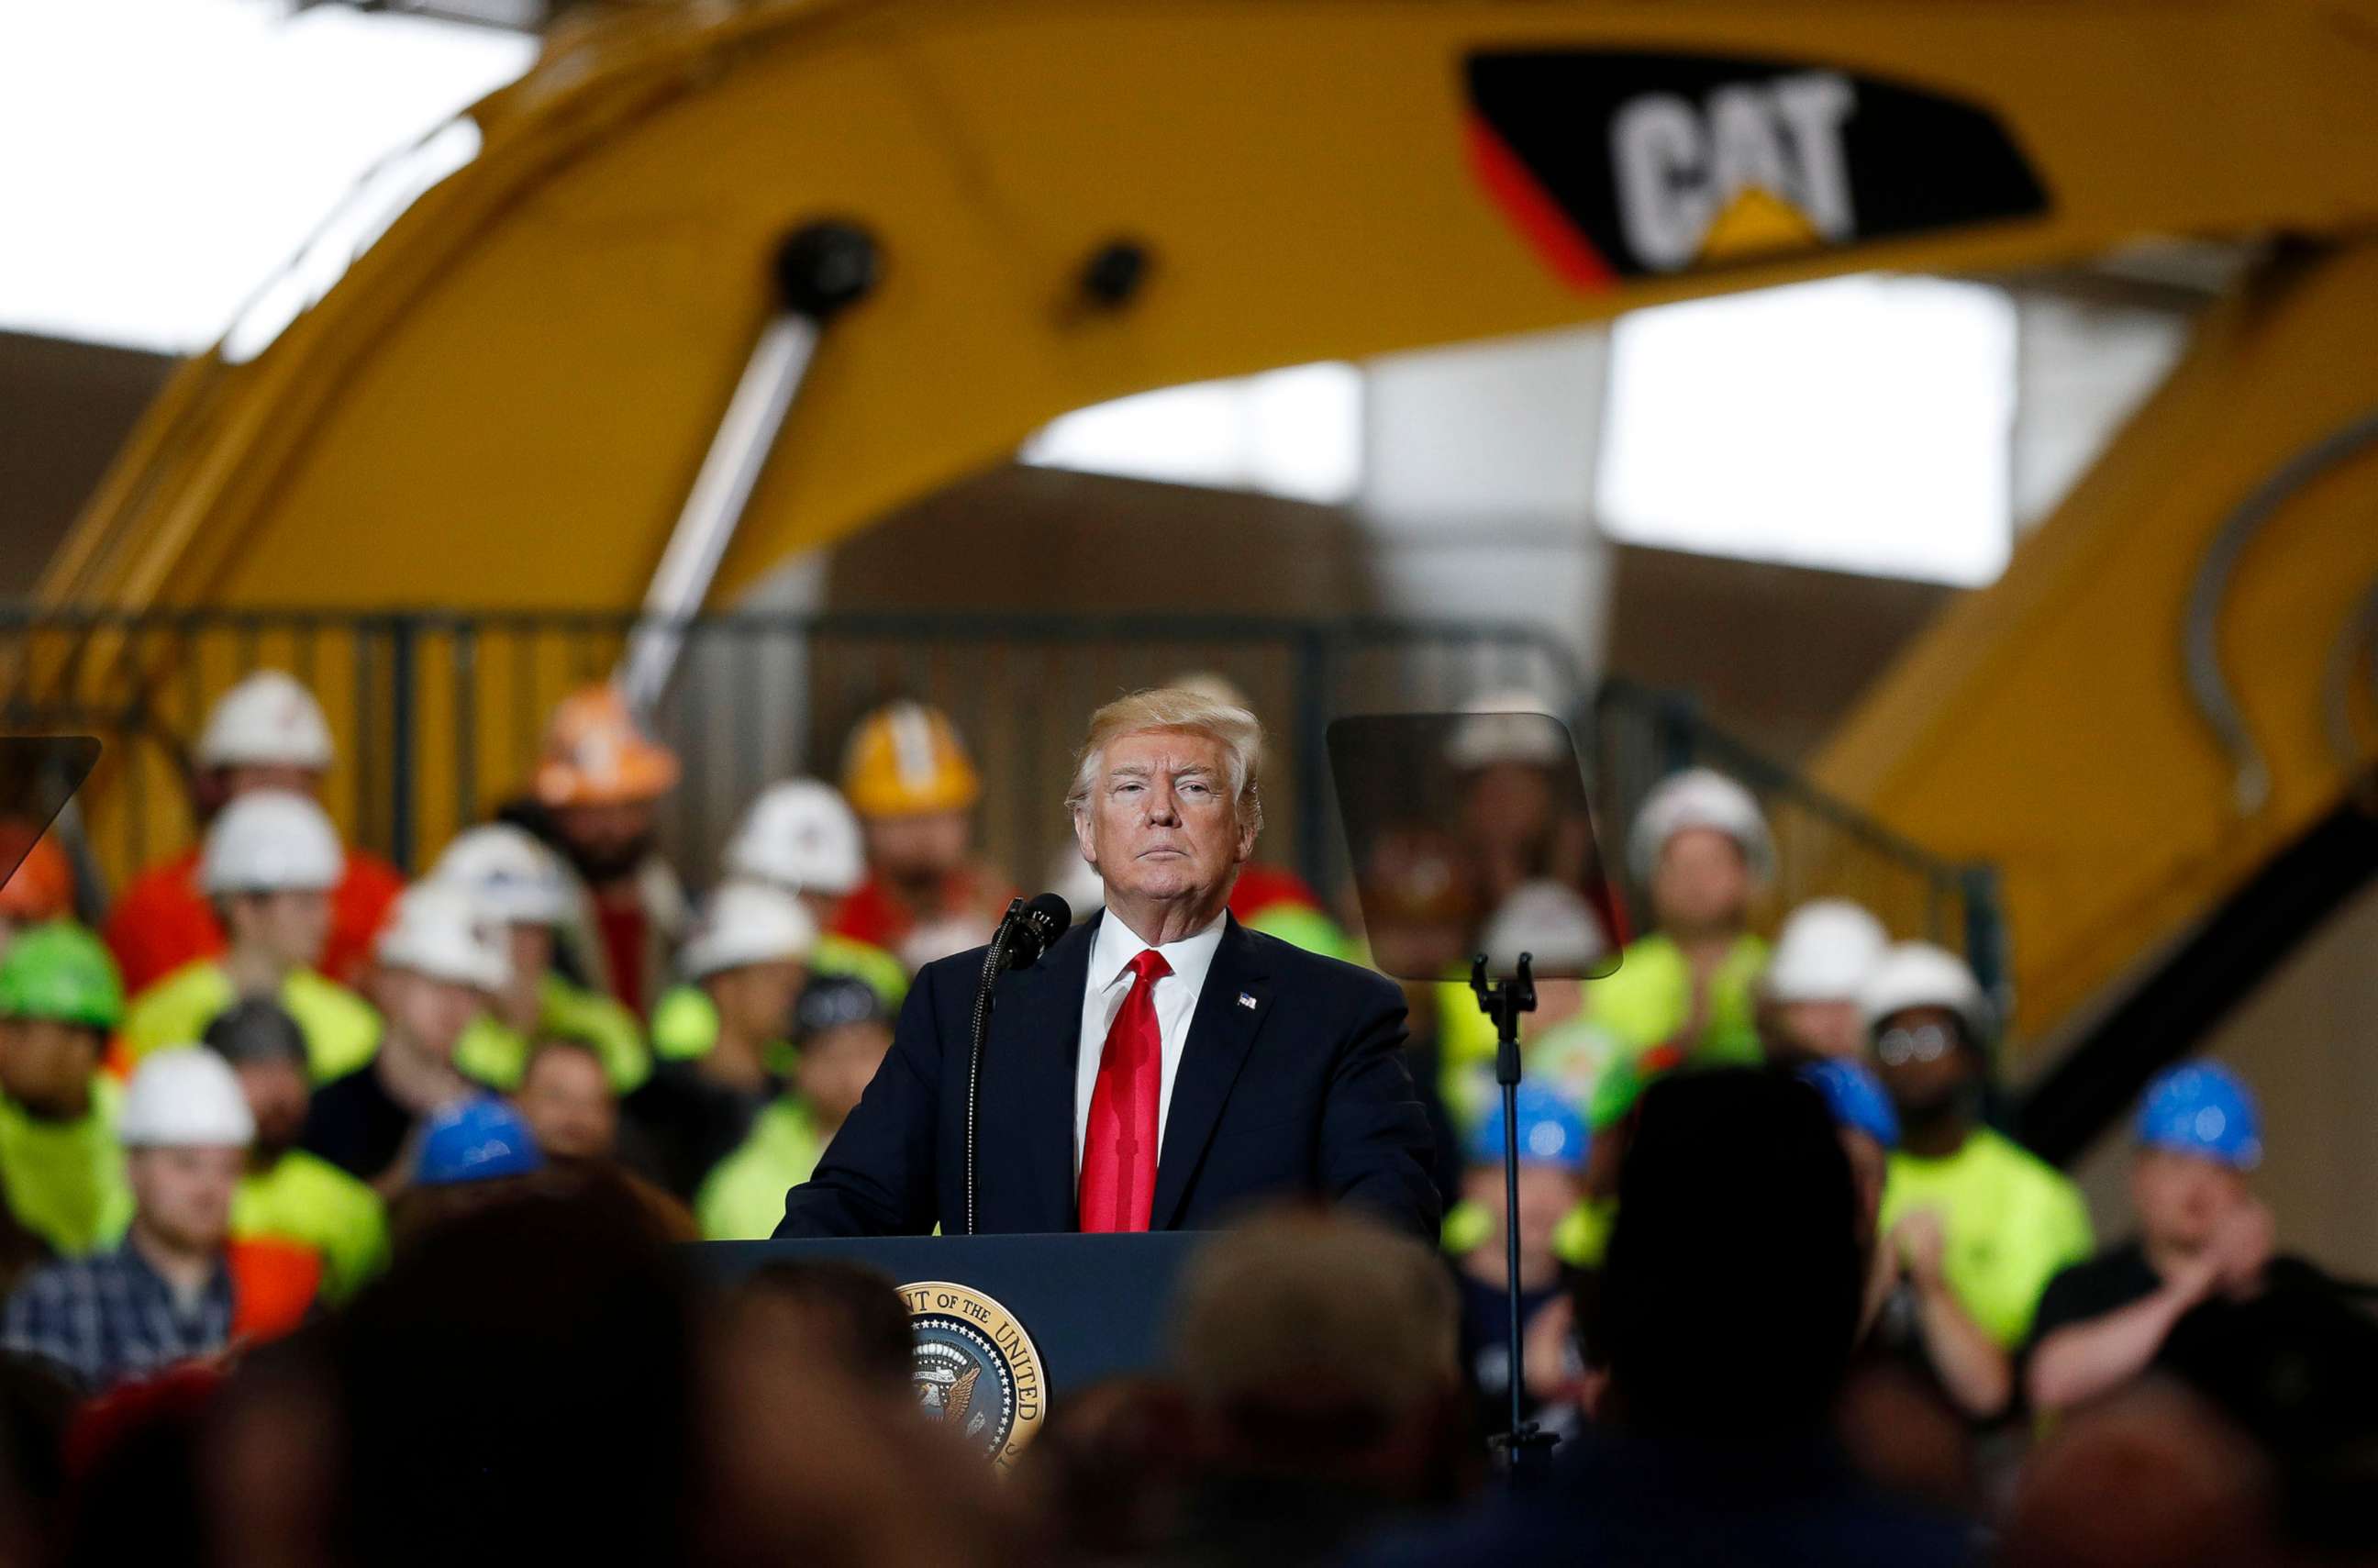 PHOTO: President Donald J. Trump speaks about his infrastructure plan during a visit to Local 18 Richfield Training Facility in Richfield, Ohio, March 29, 2018.